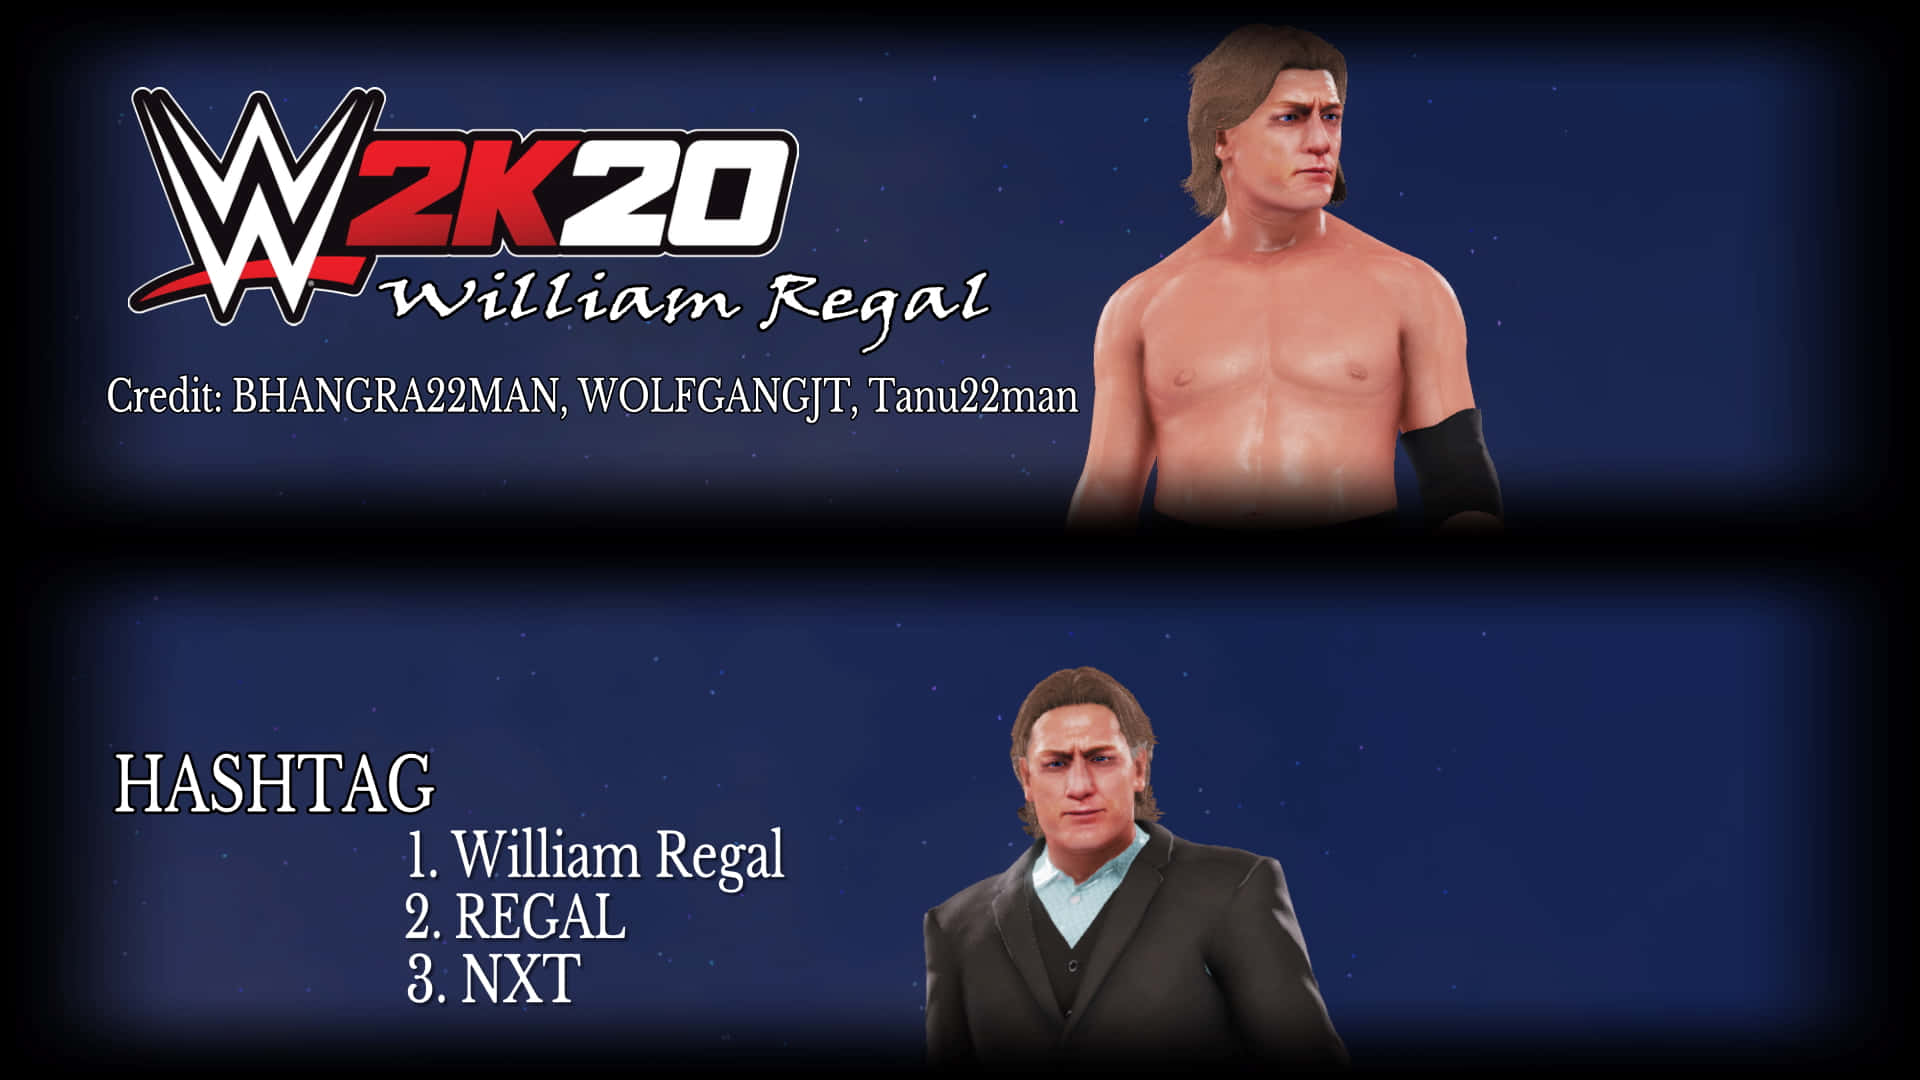 Williamregal Wwe Nxt 2k20 Can Be Translated As 